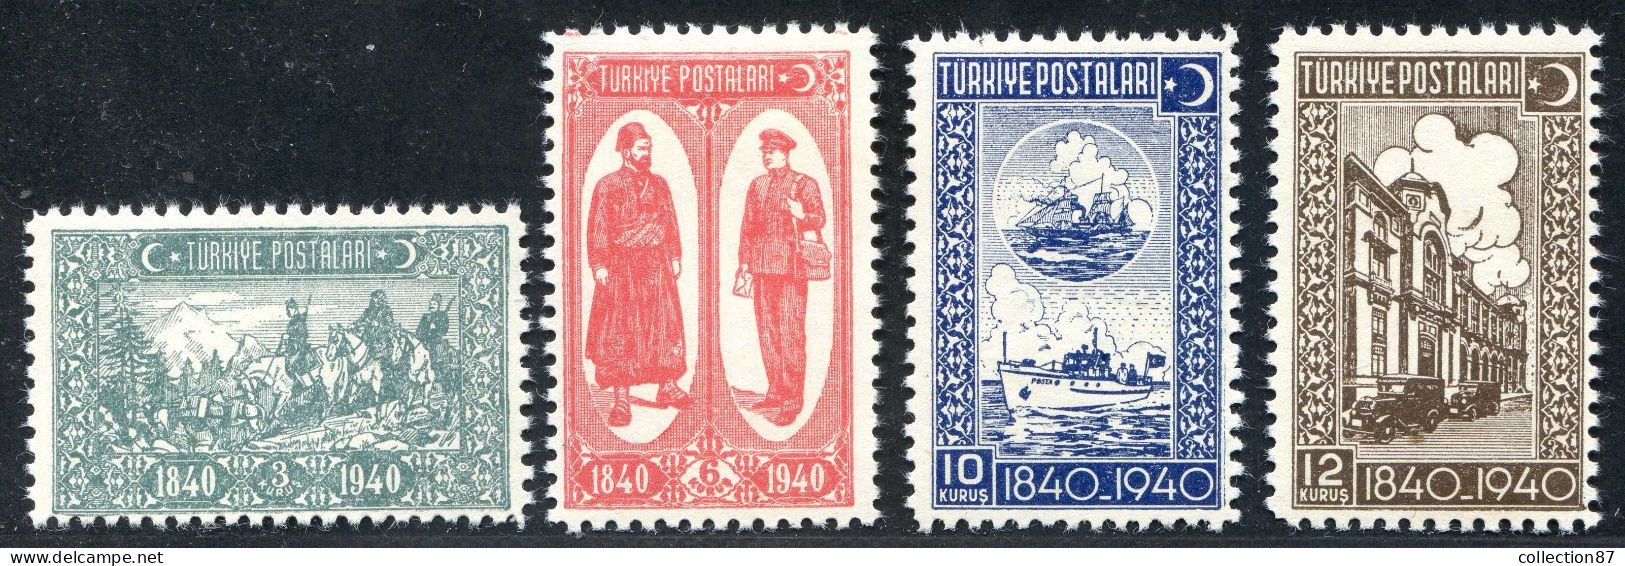 REF 091 > TURQUIE < Yv N° 947 à 950 * * < Neuf Luxe Dos Visible MNH * * Cat 6.75 € - Turkey - Neufs